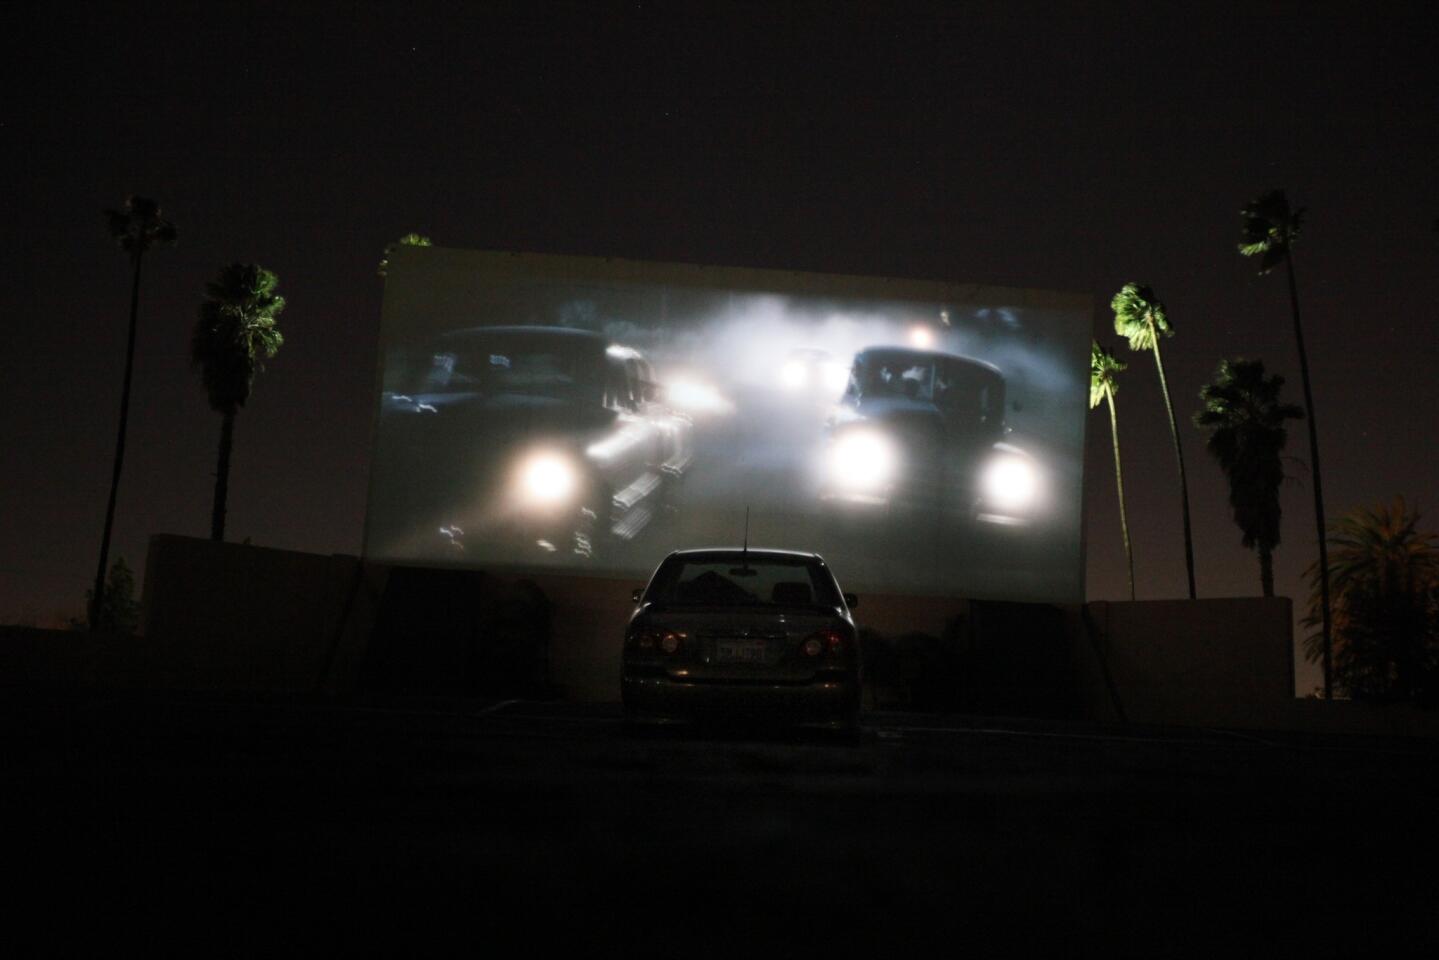 Drive-in theaters